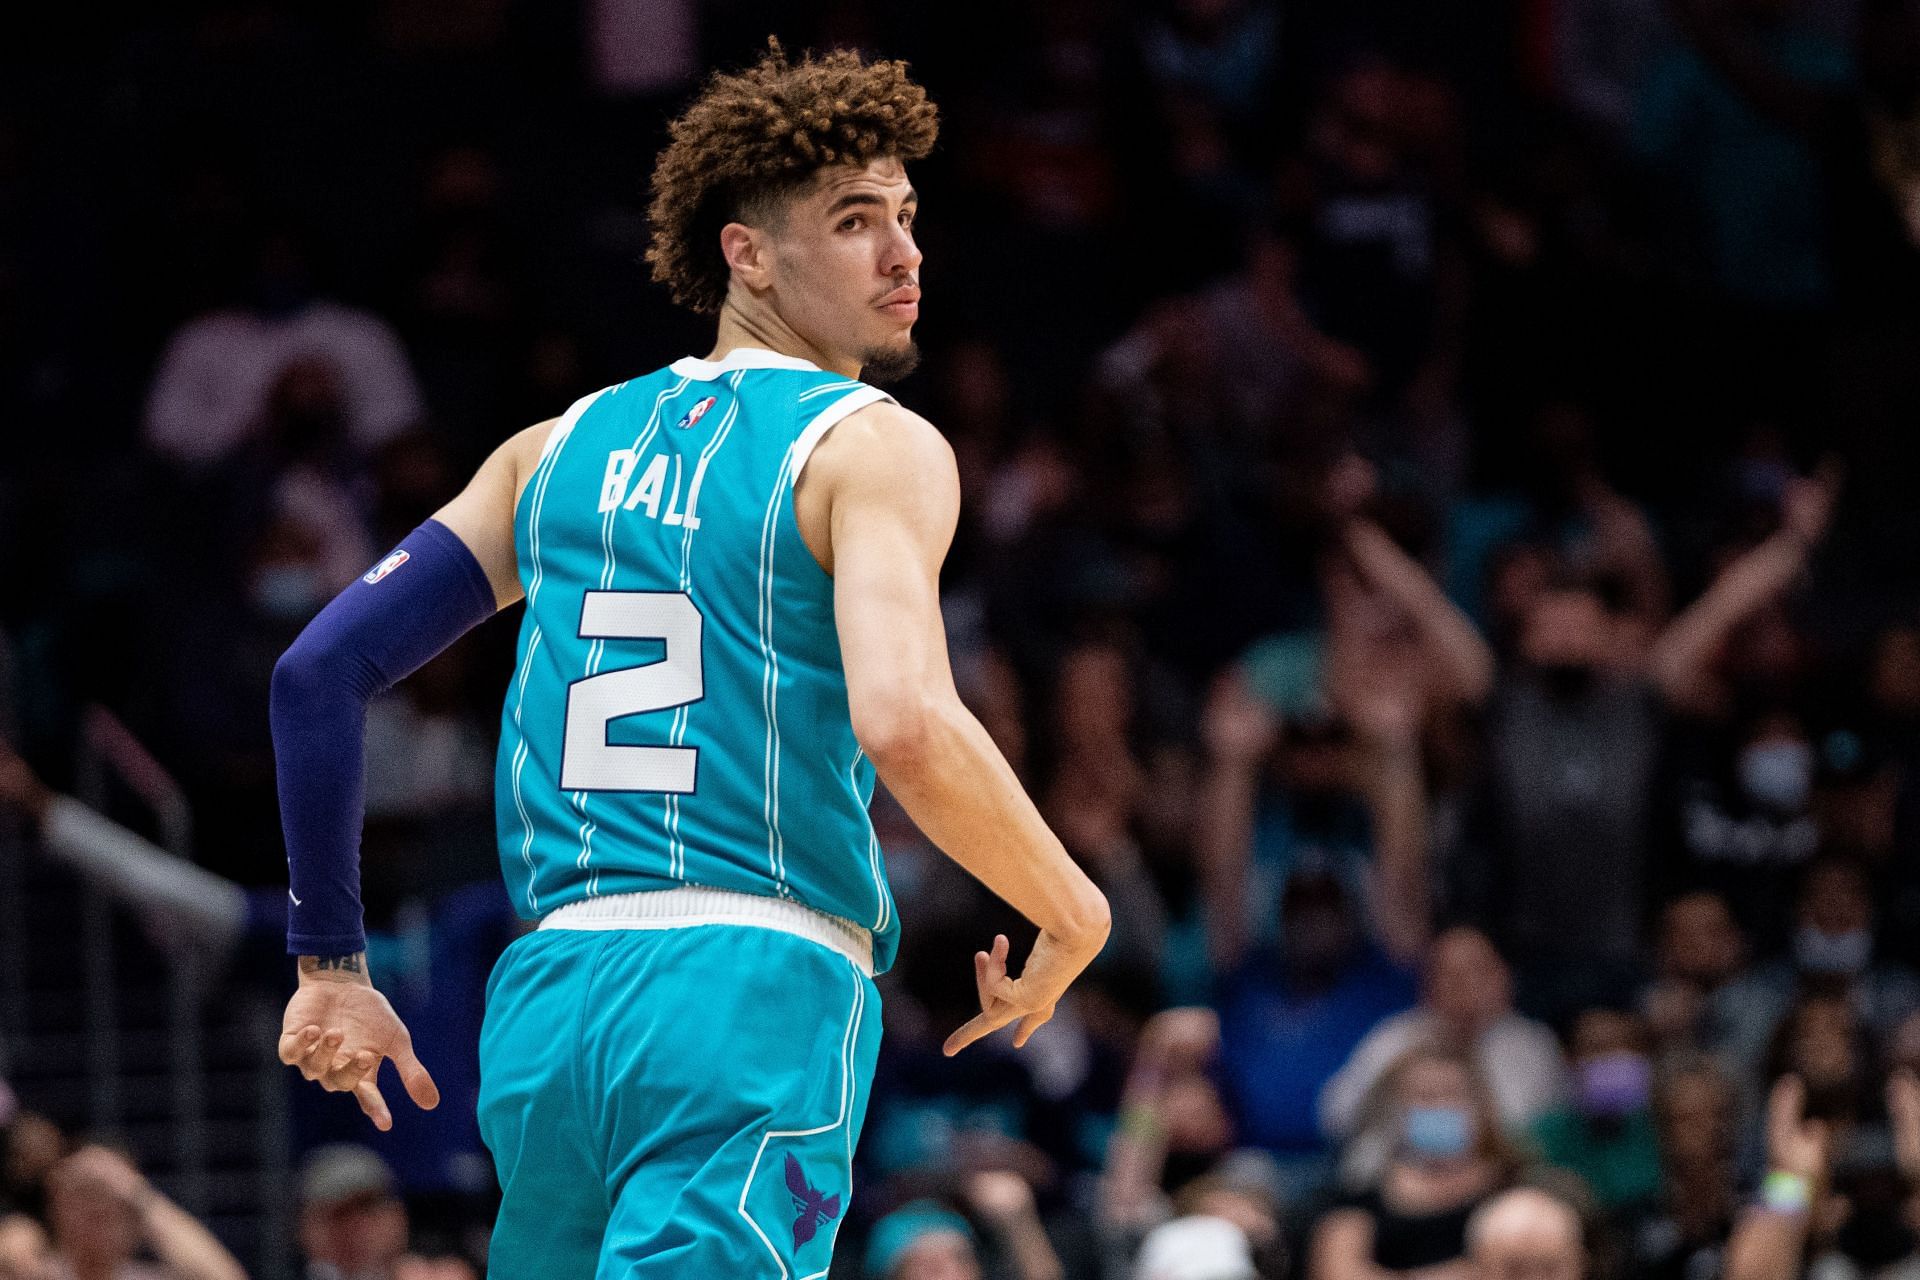 LaMelo Ball #2 of the Charlotte Hornets.